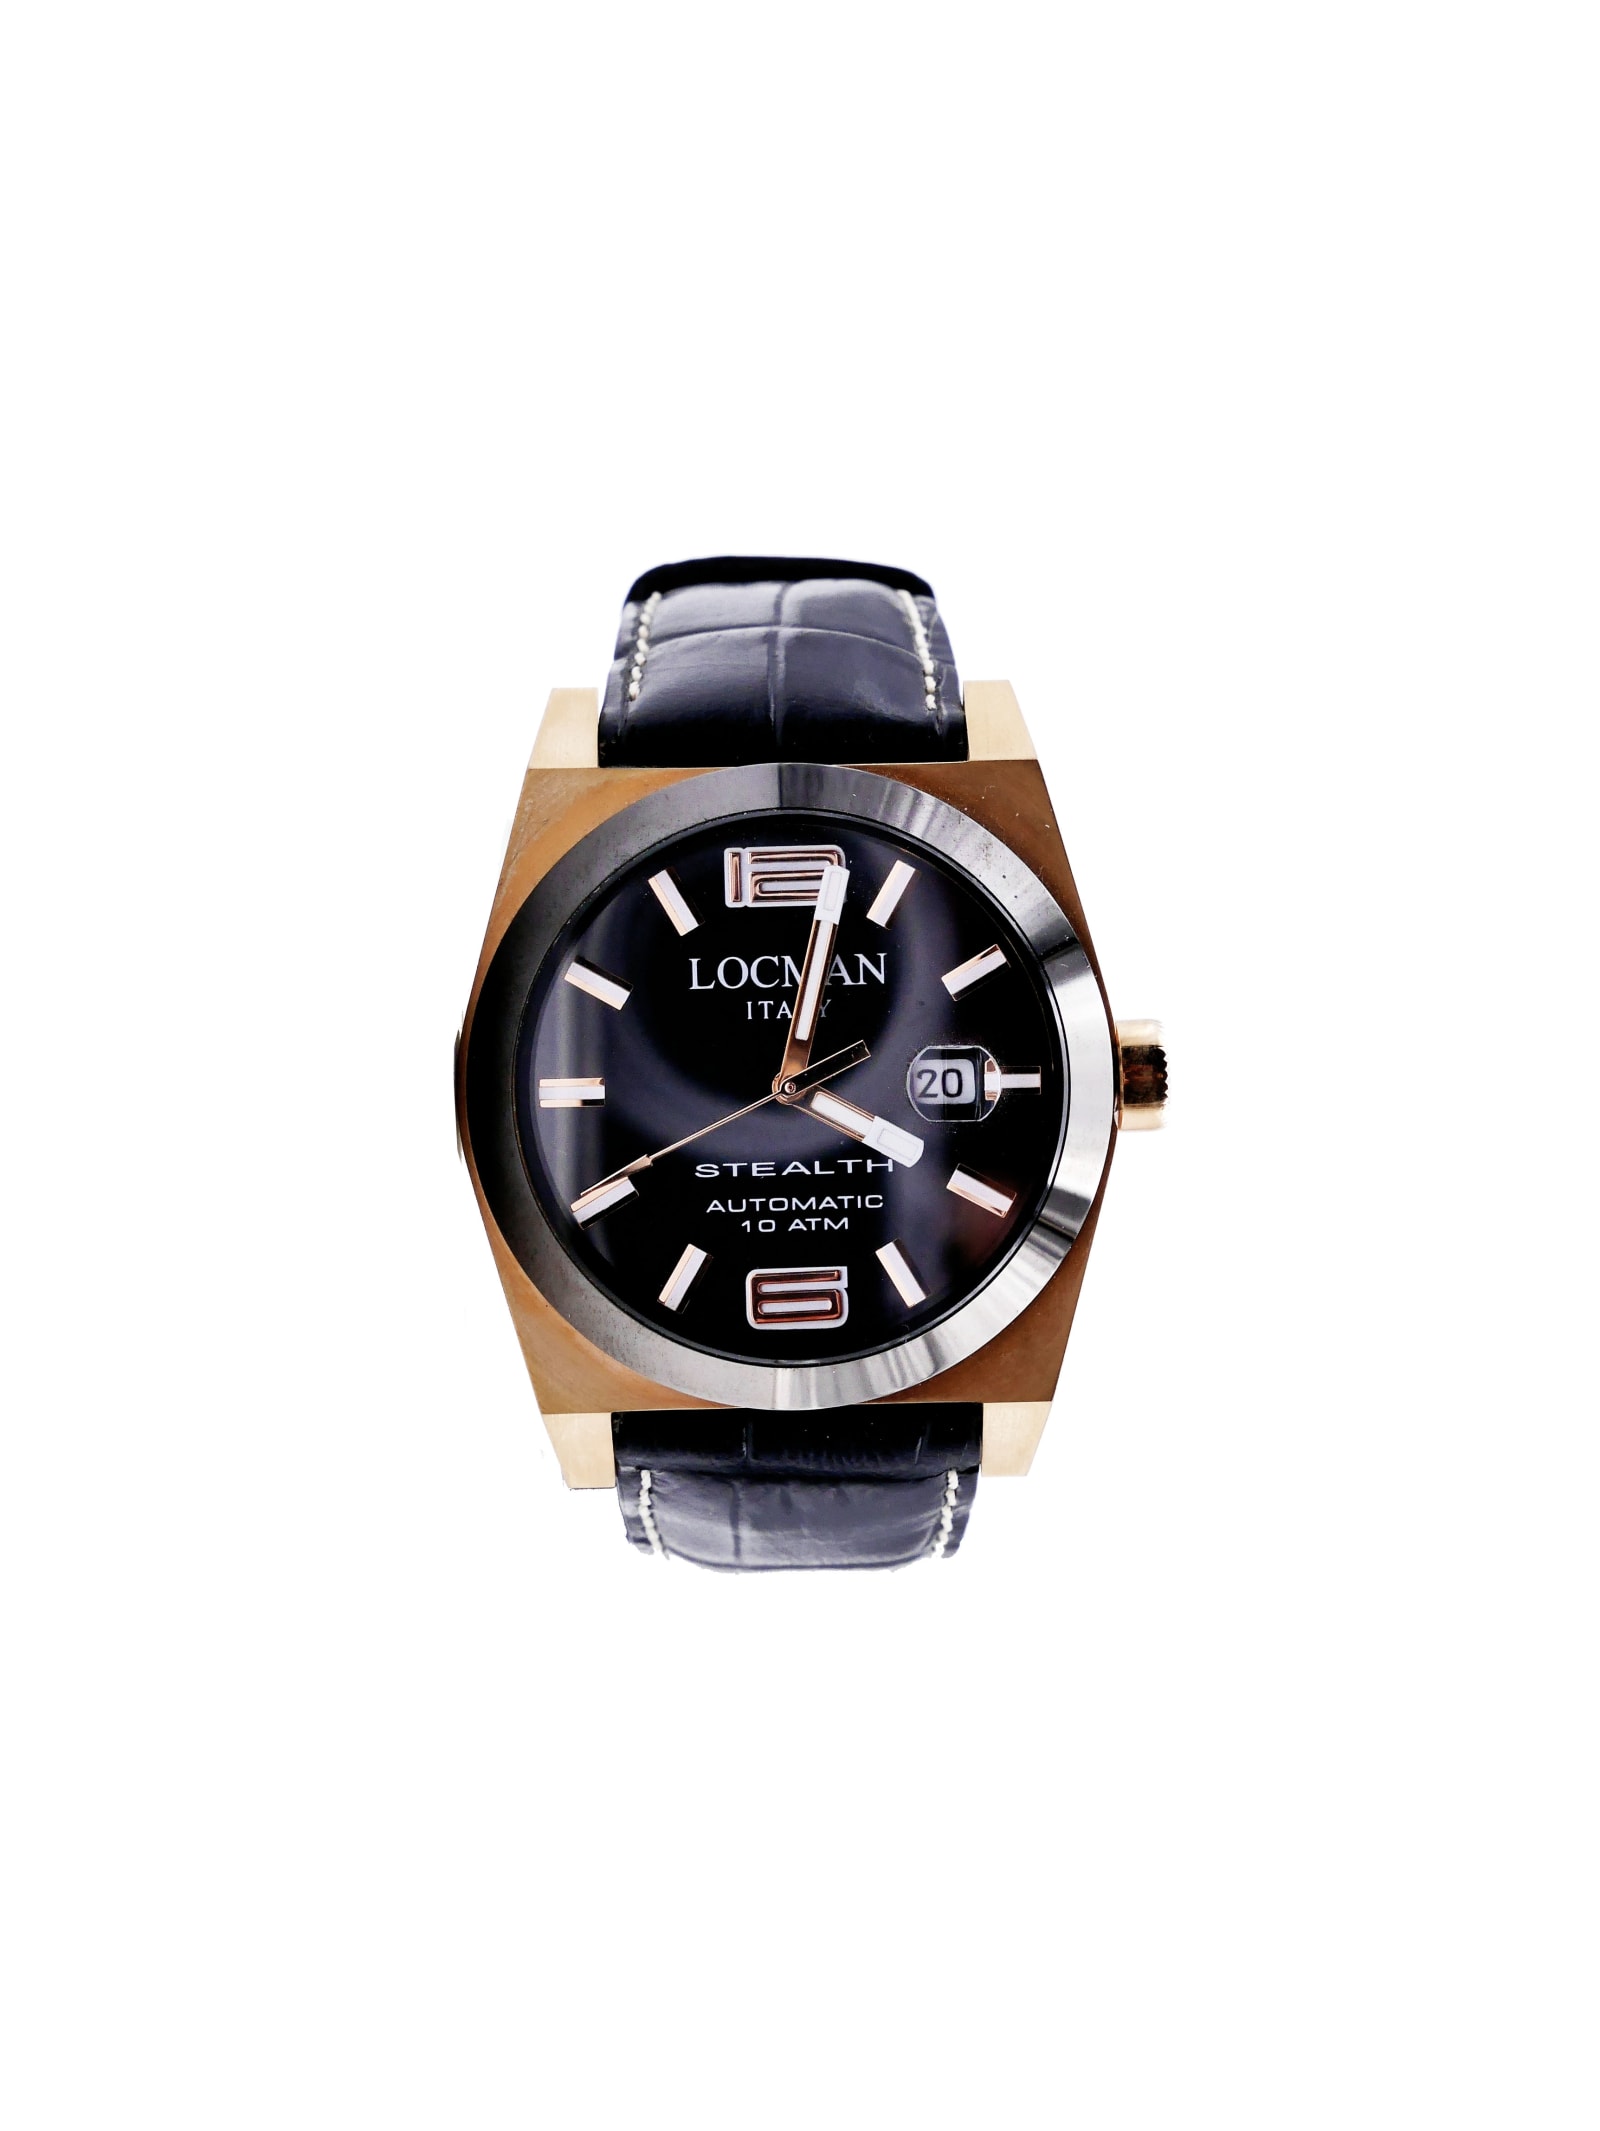 Locman Italy Stealth Automatic Watches